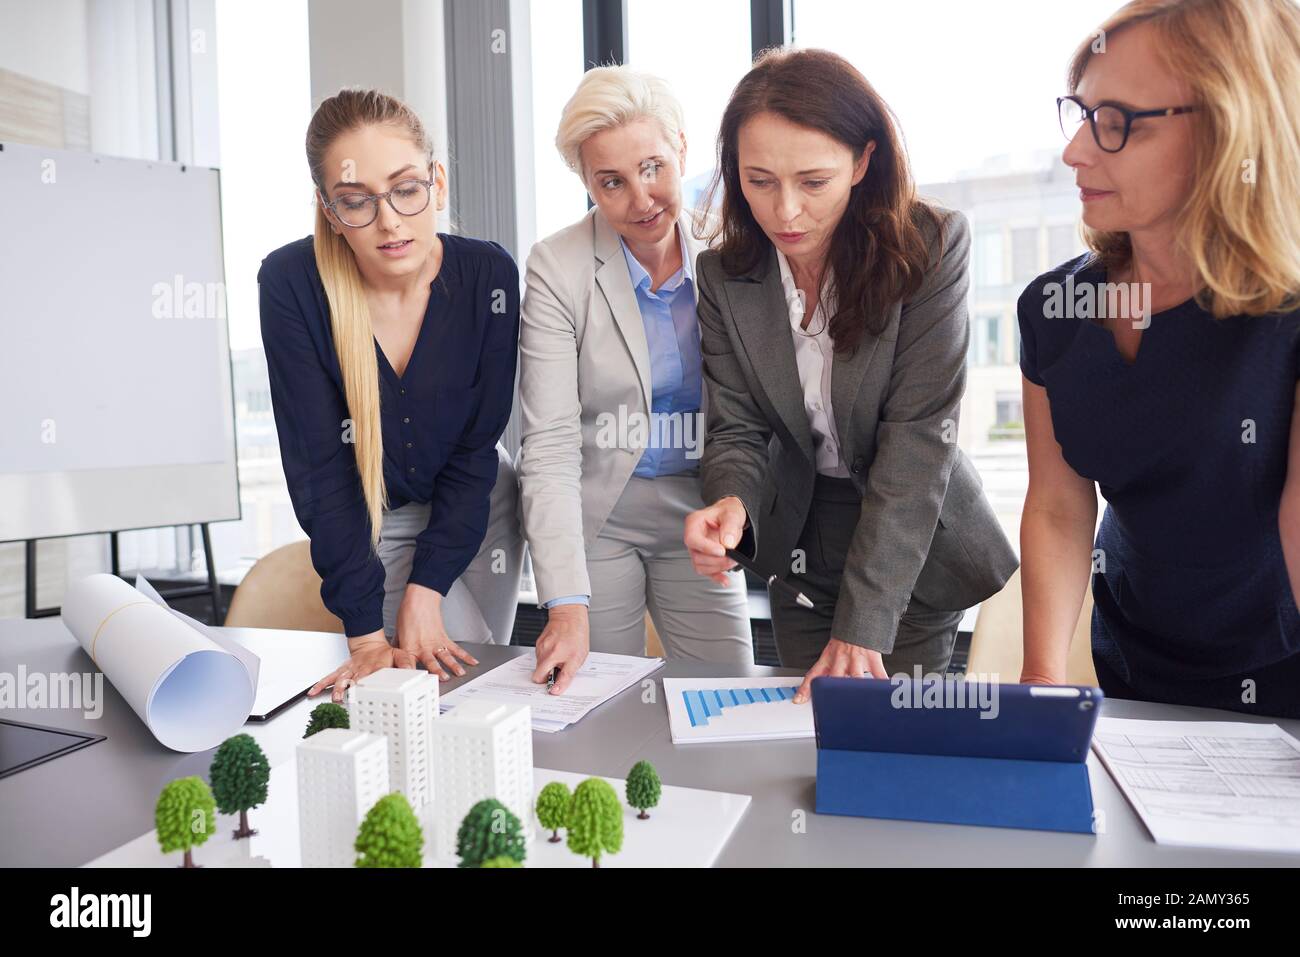 Professional female coworkers during business meeting Stock Photo